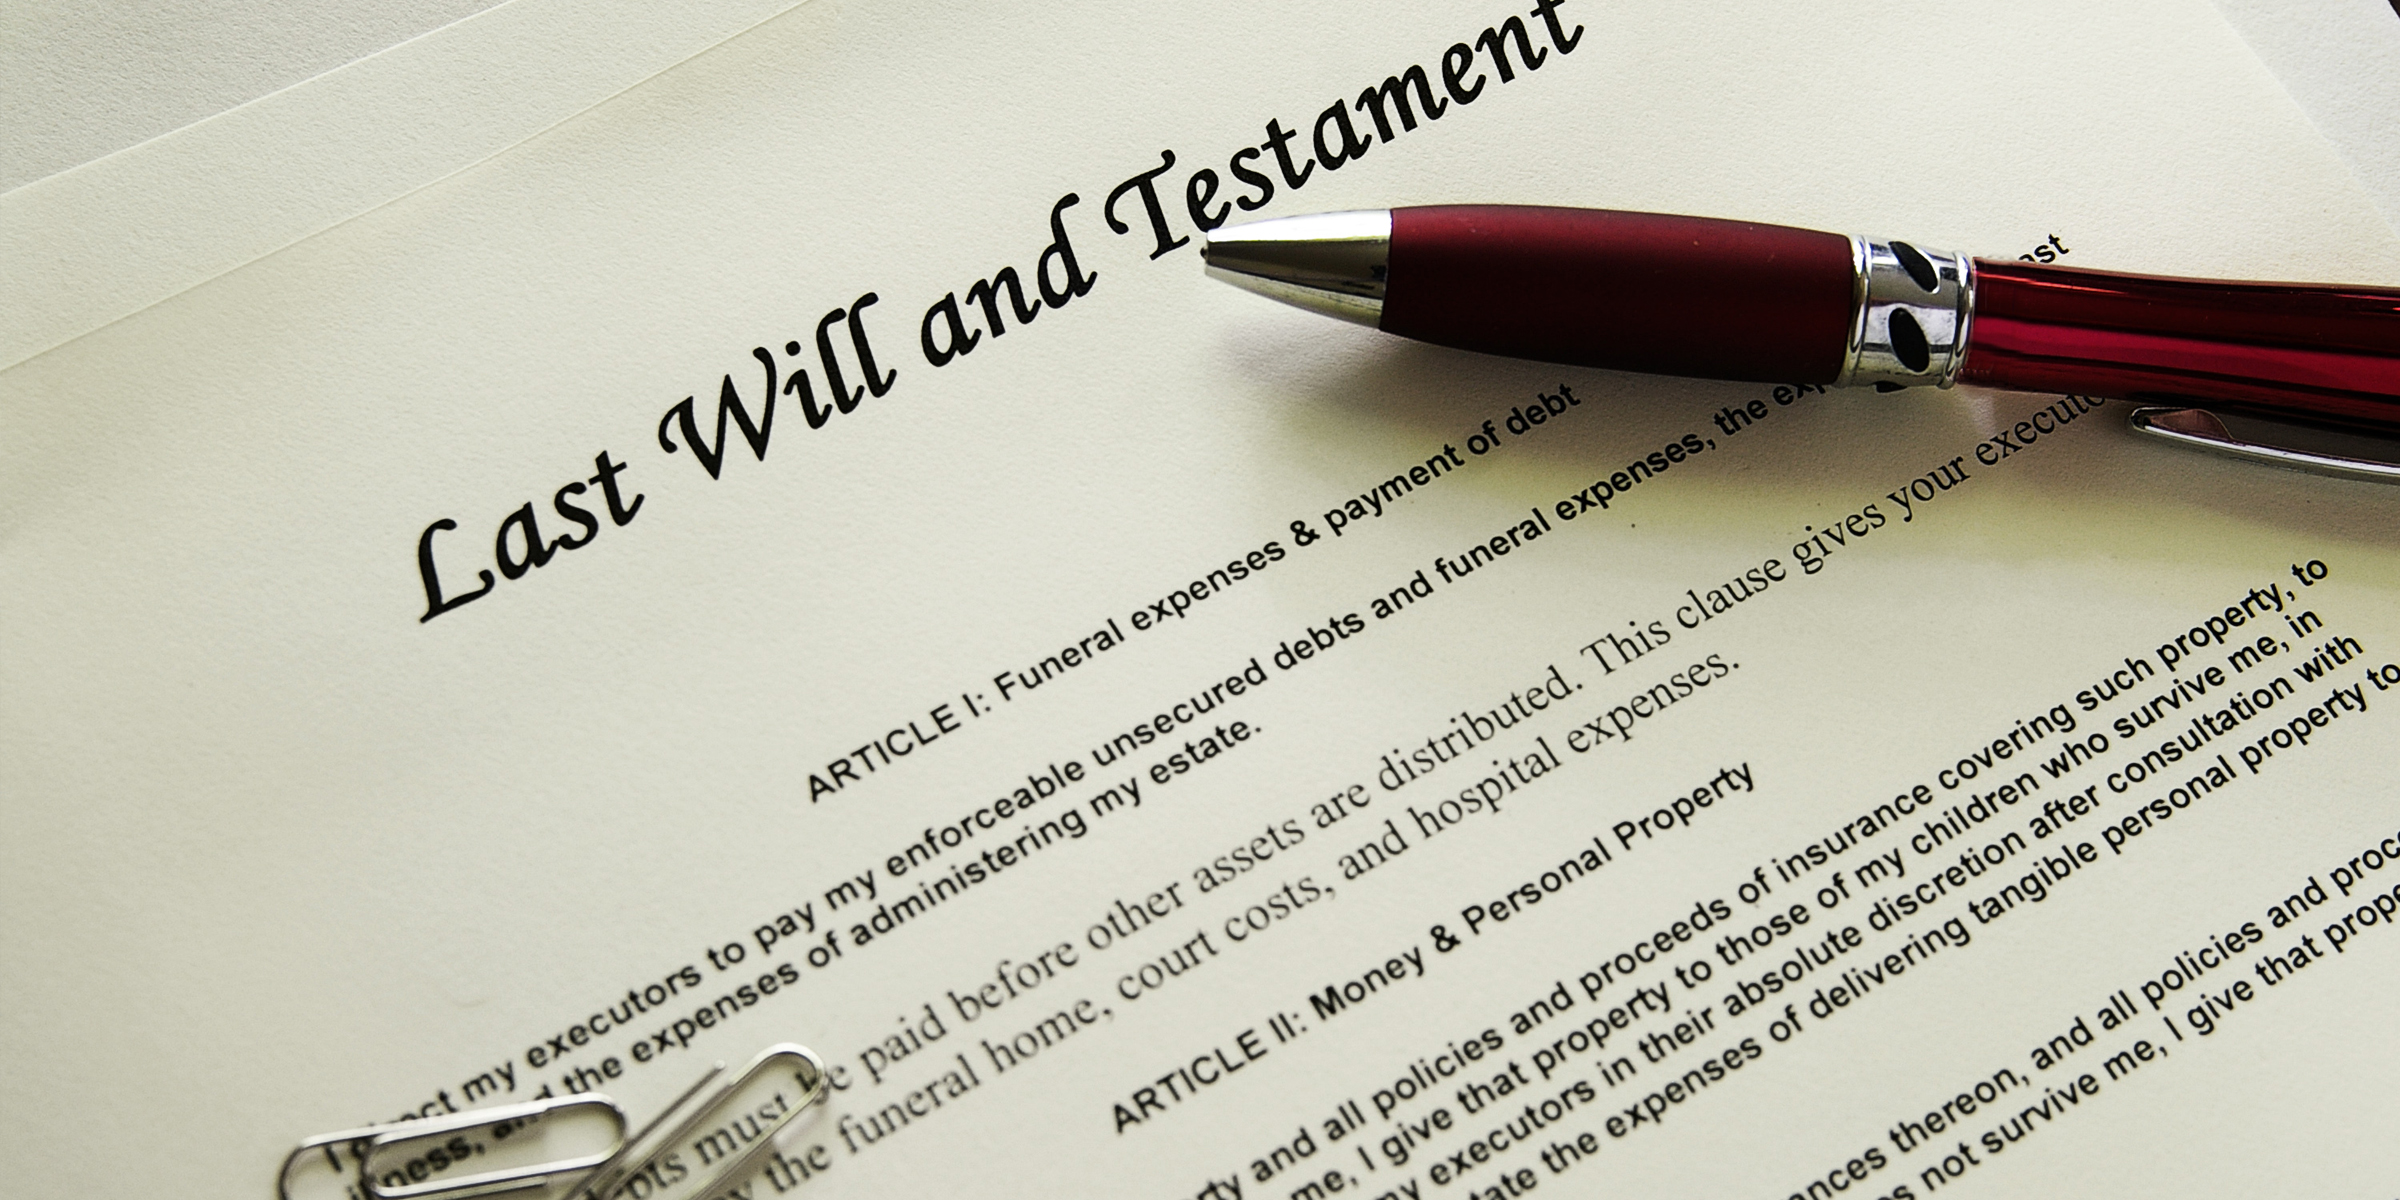 A picture of a will with a pen on top | Source: Shutterstock